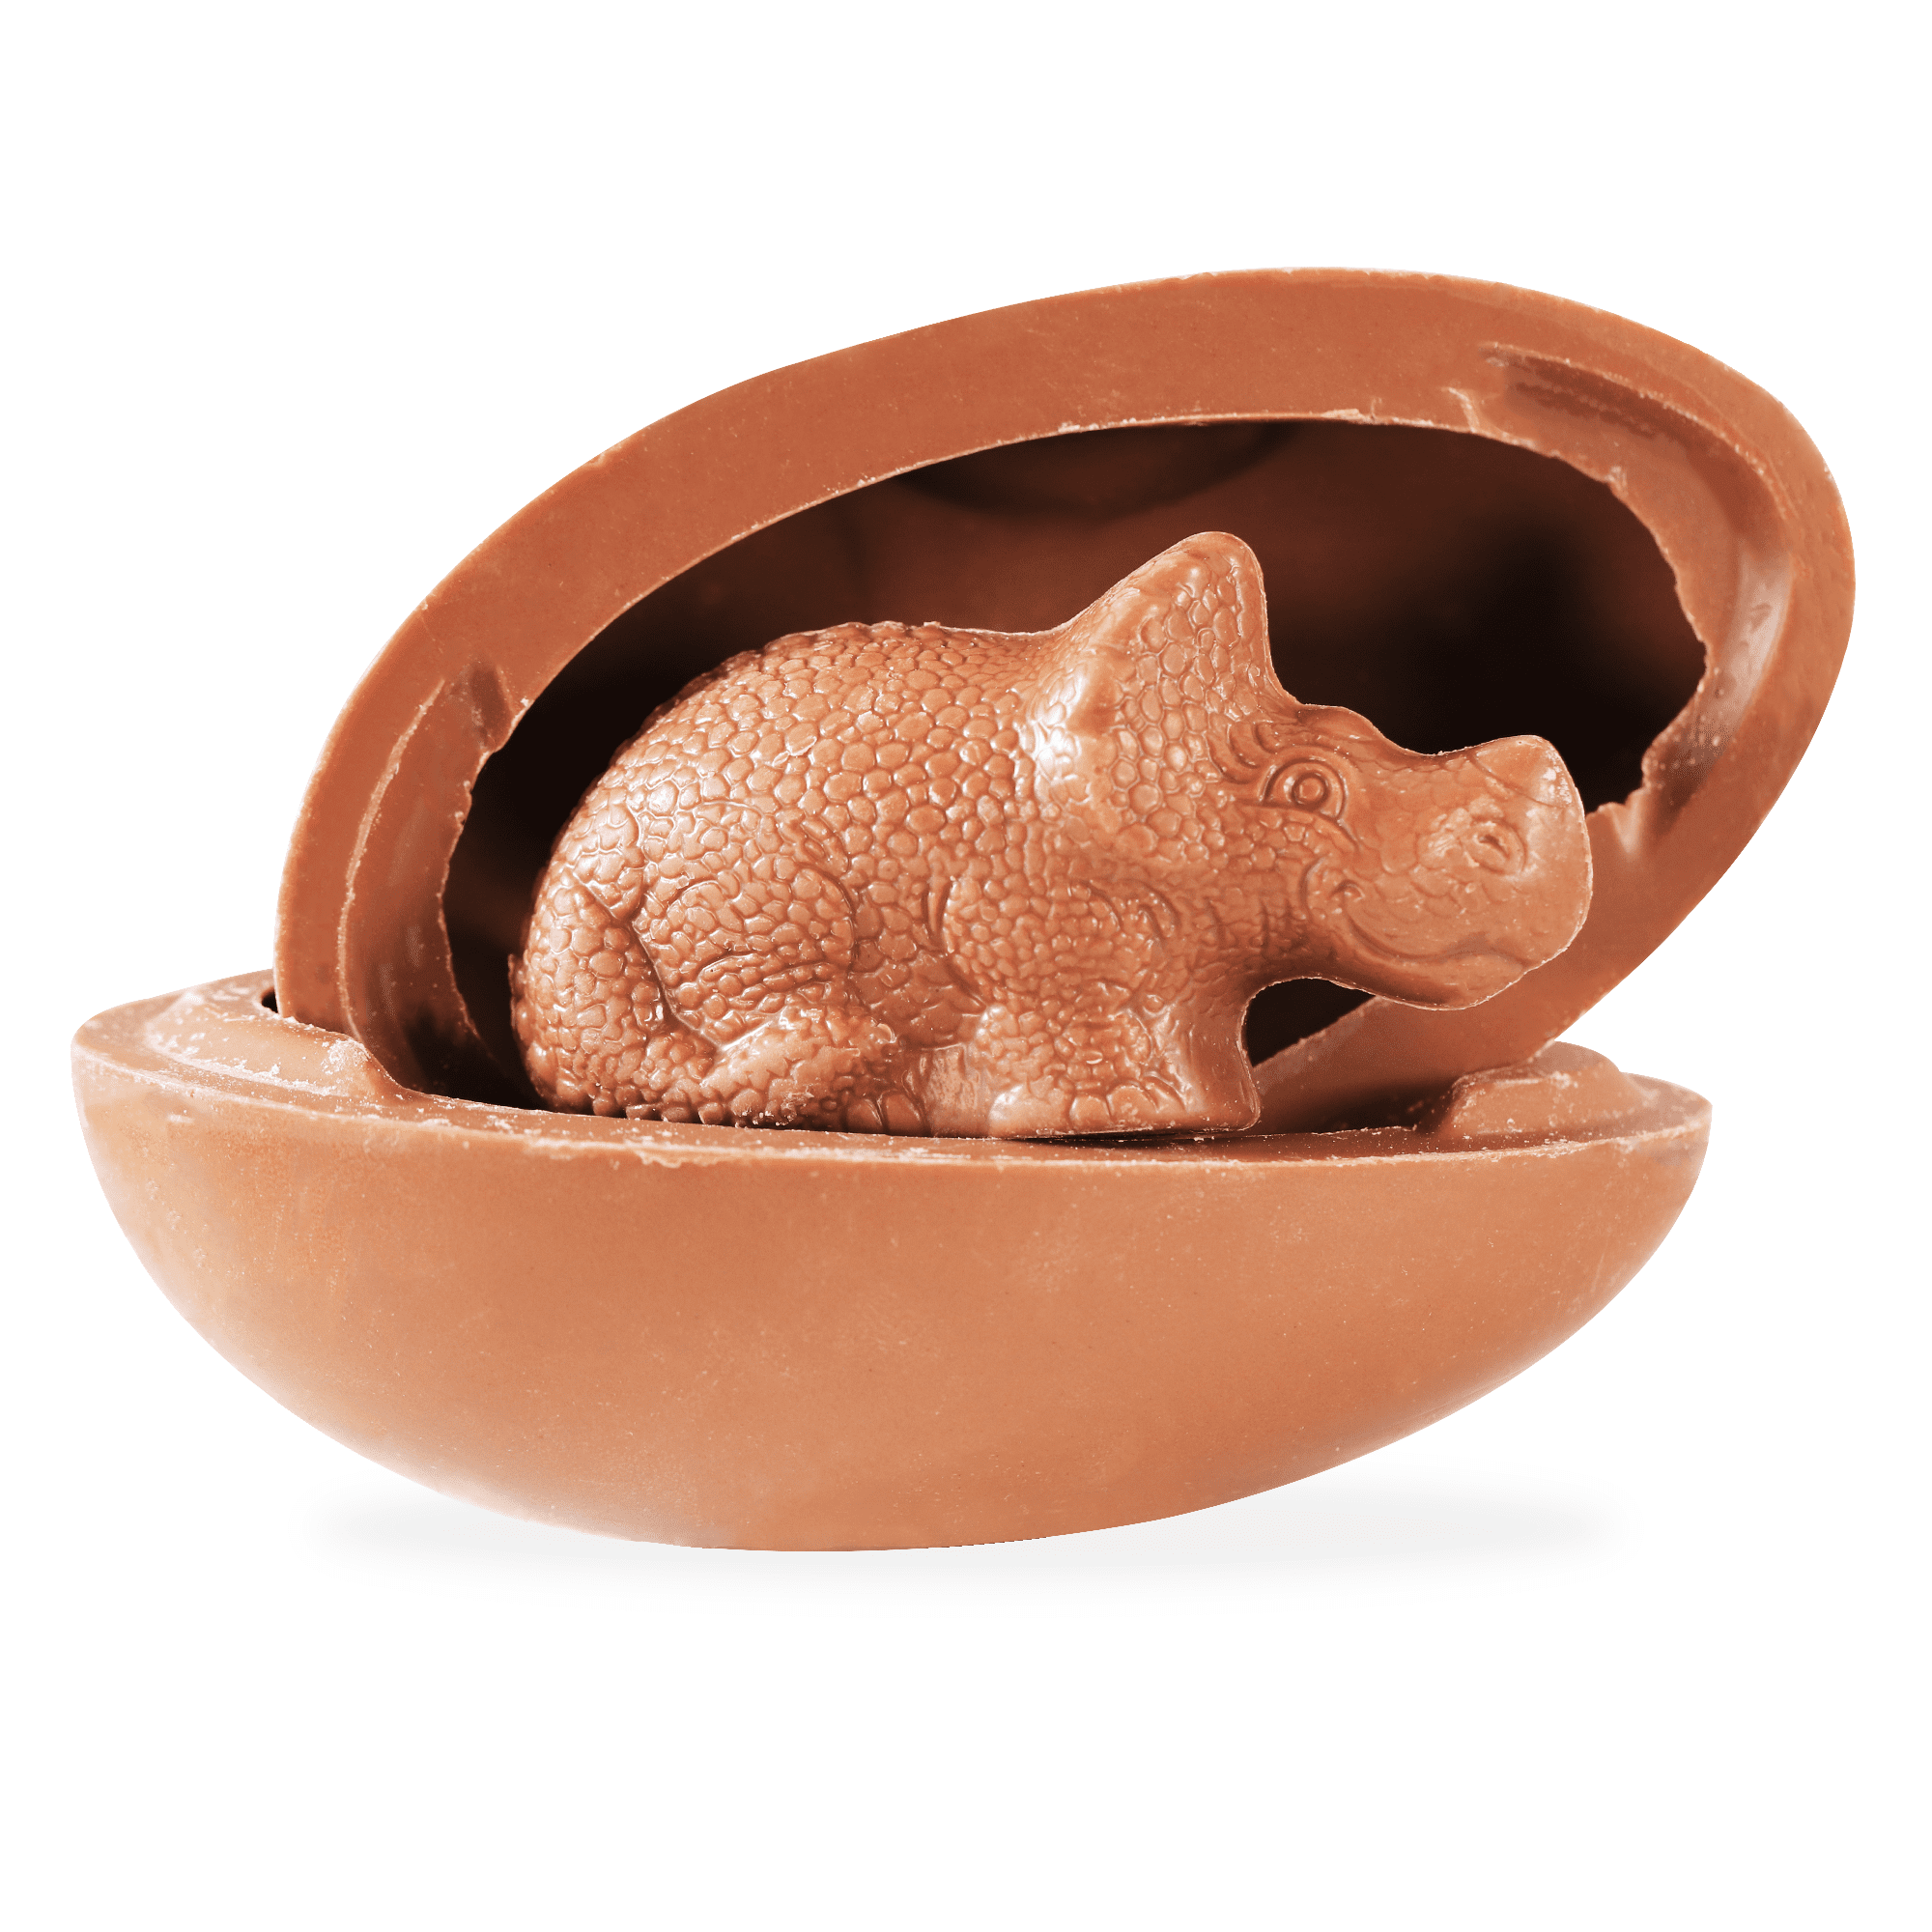 Surprise Dino Egg, Chocolate Easter Candy